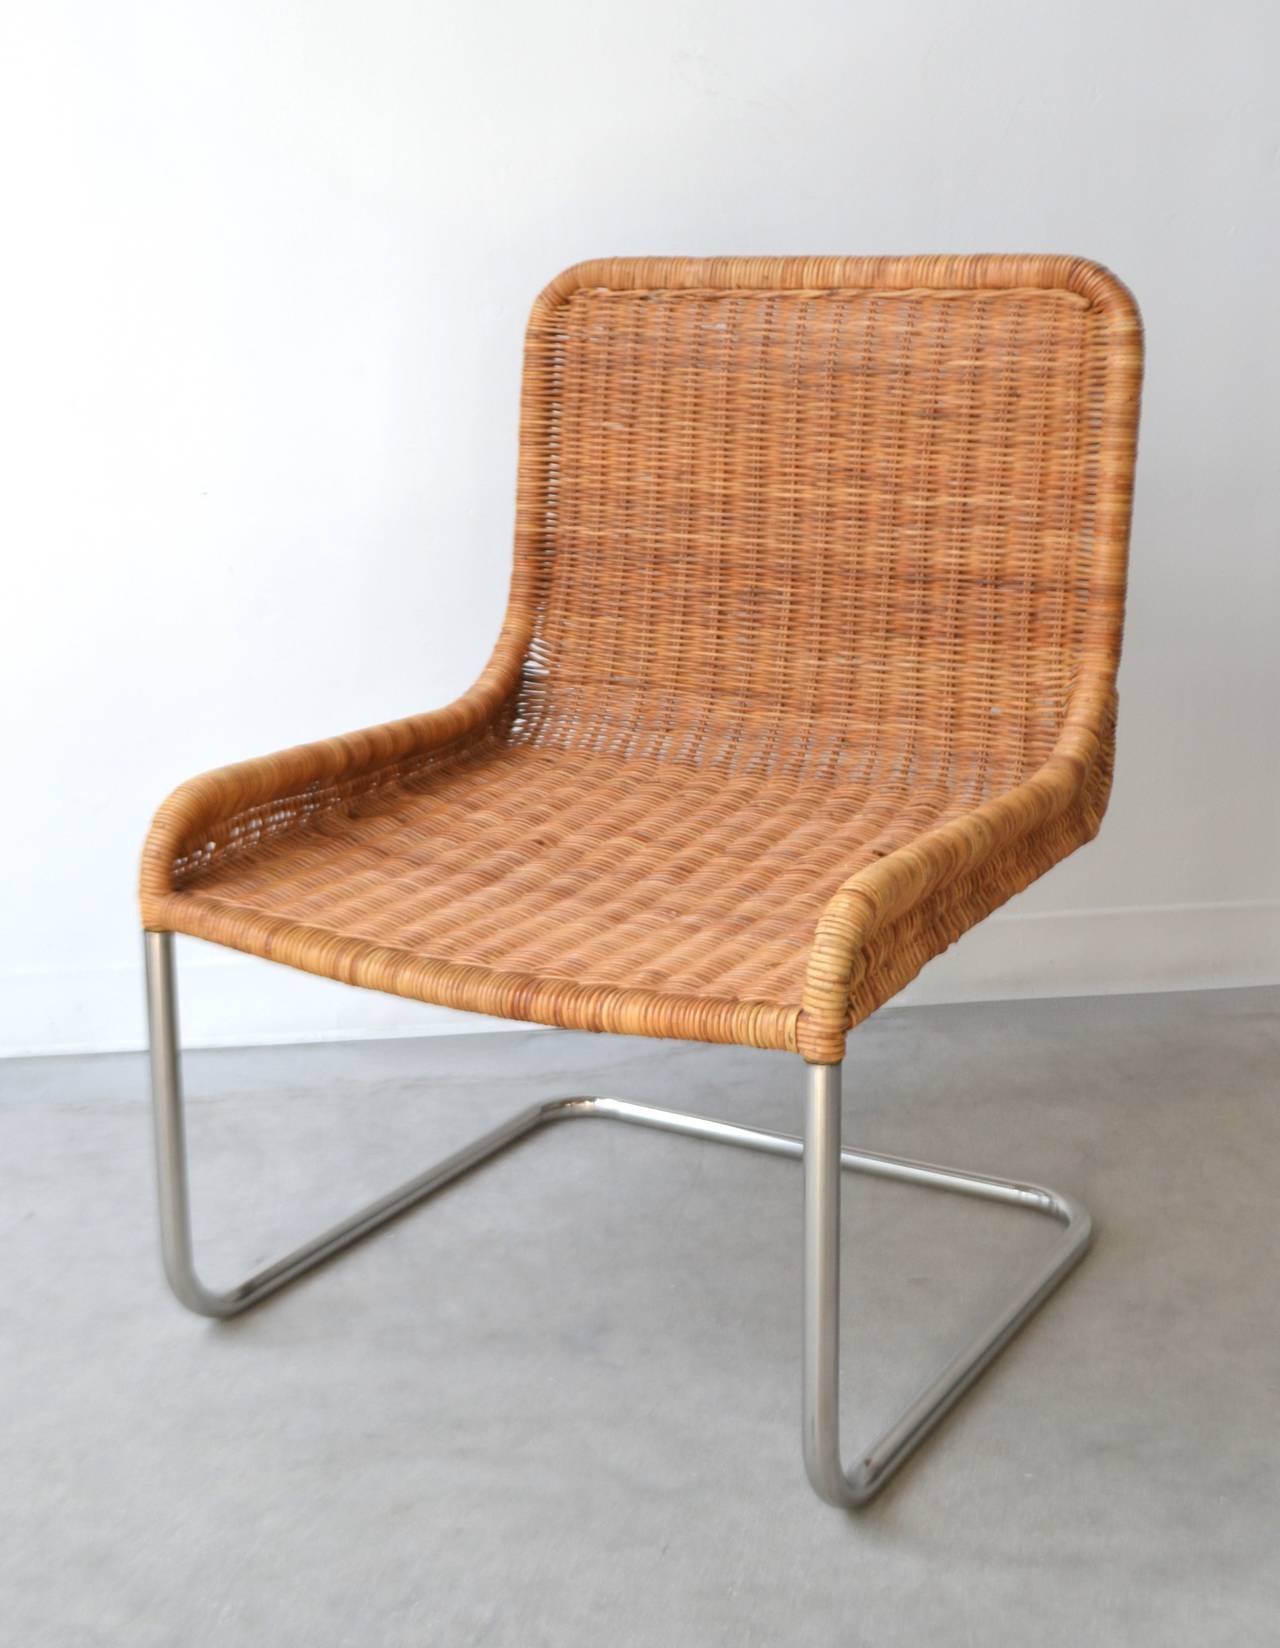 Chrome Woven Rattan and Leather Occasional Chair / Side Chair